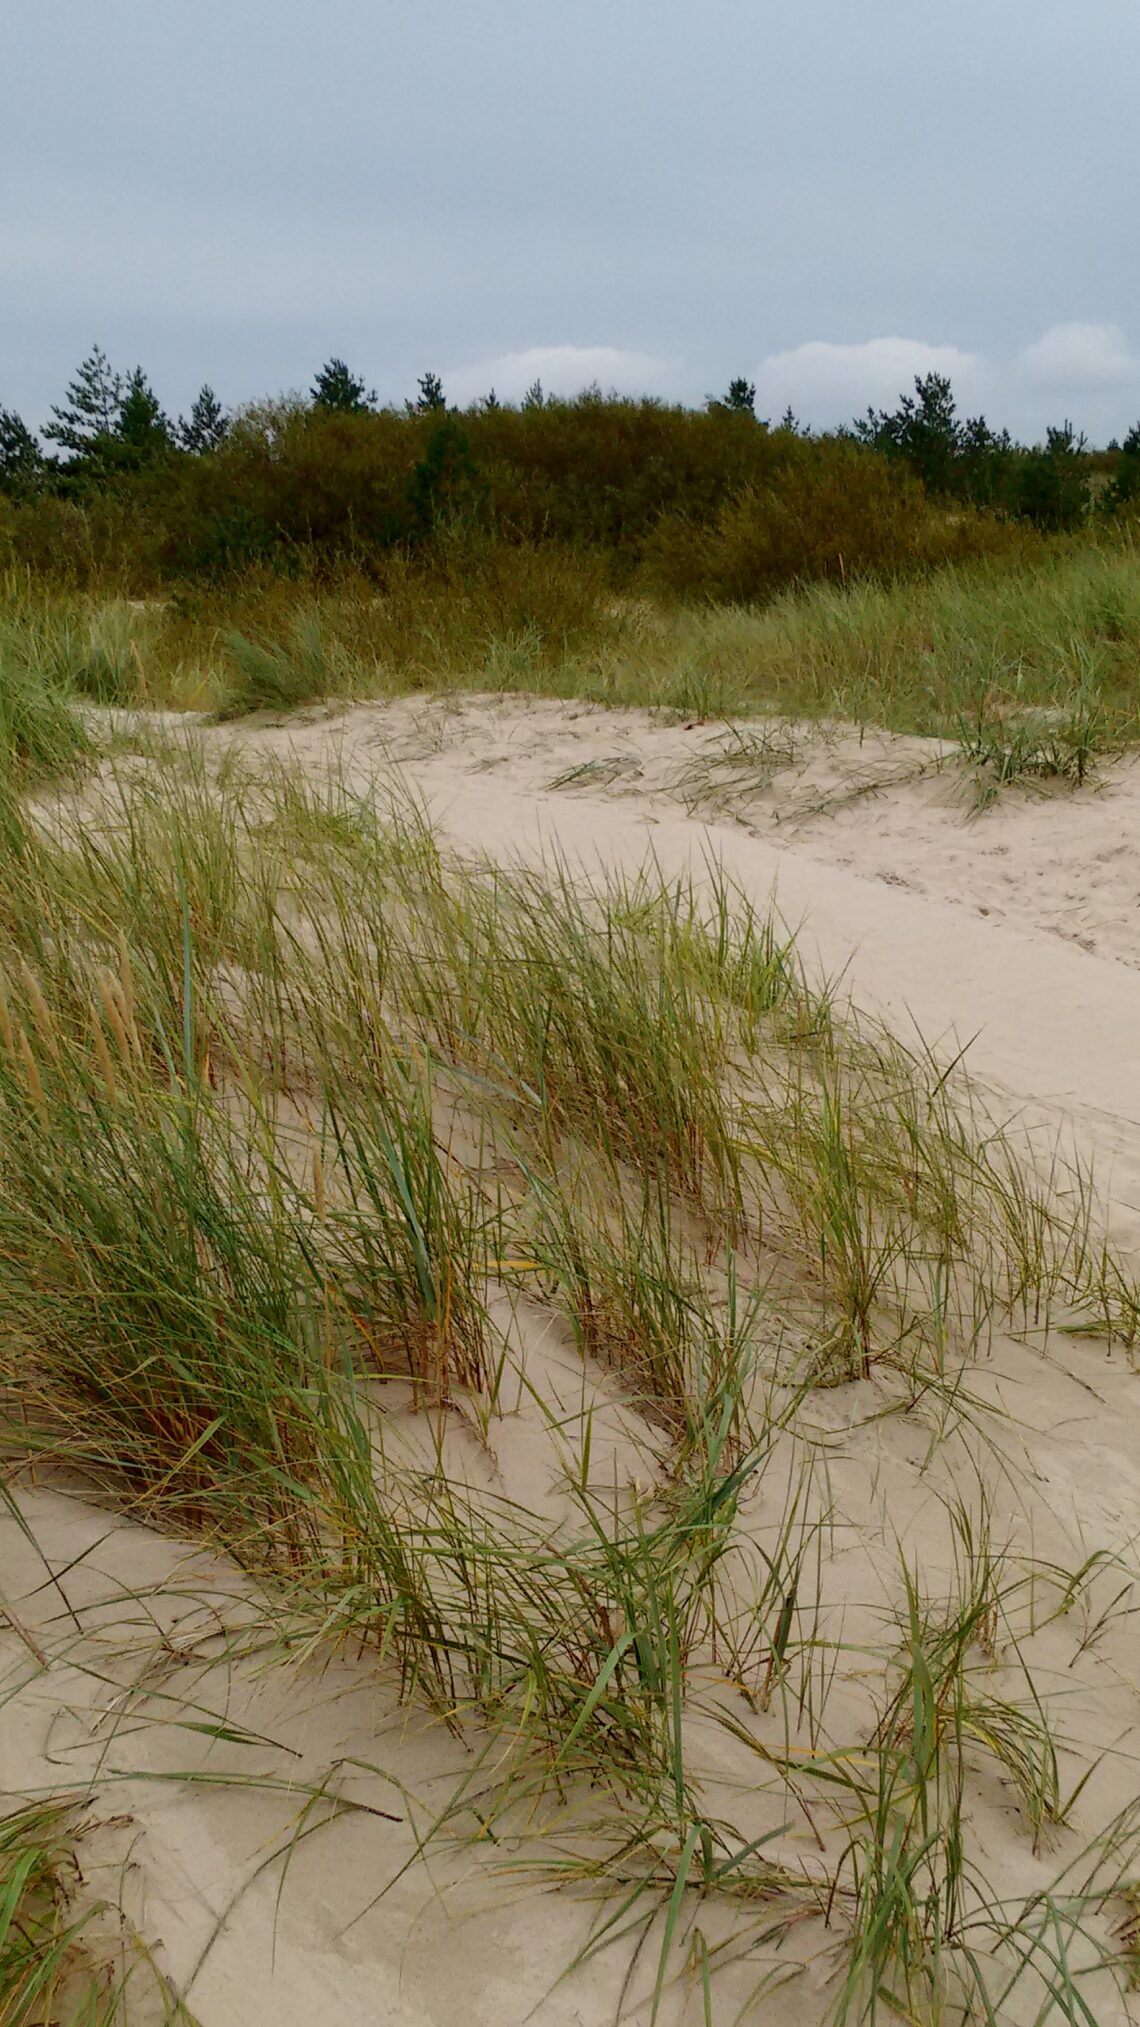 Maram grass on sand dunes in front of more grass and pine wood. Wooden path is lightly covered by sand, winding through the foreground.